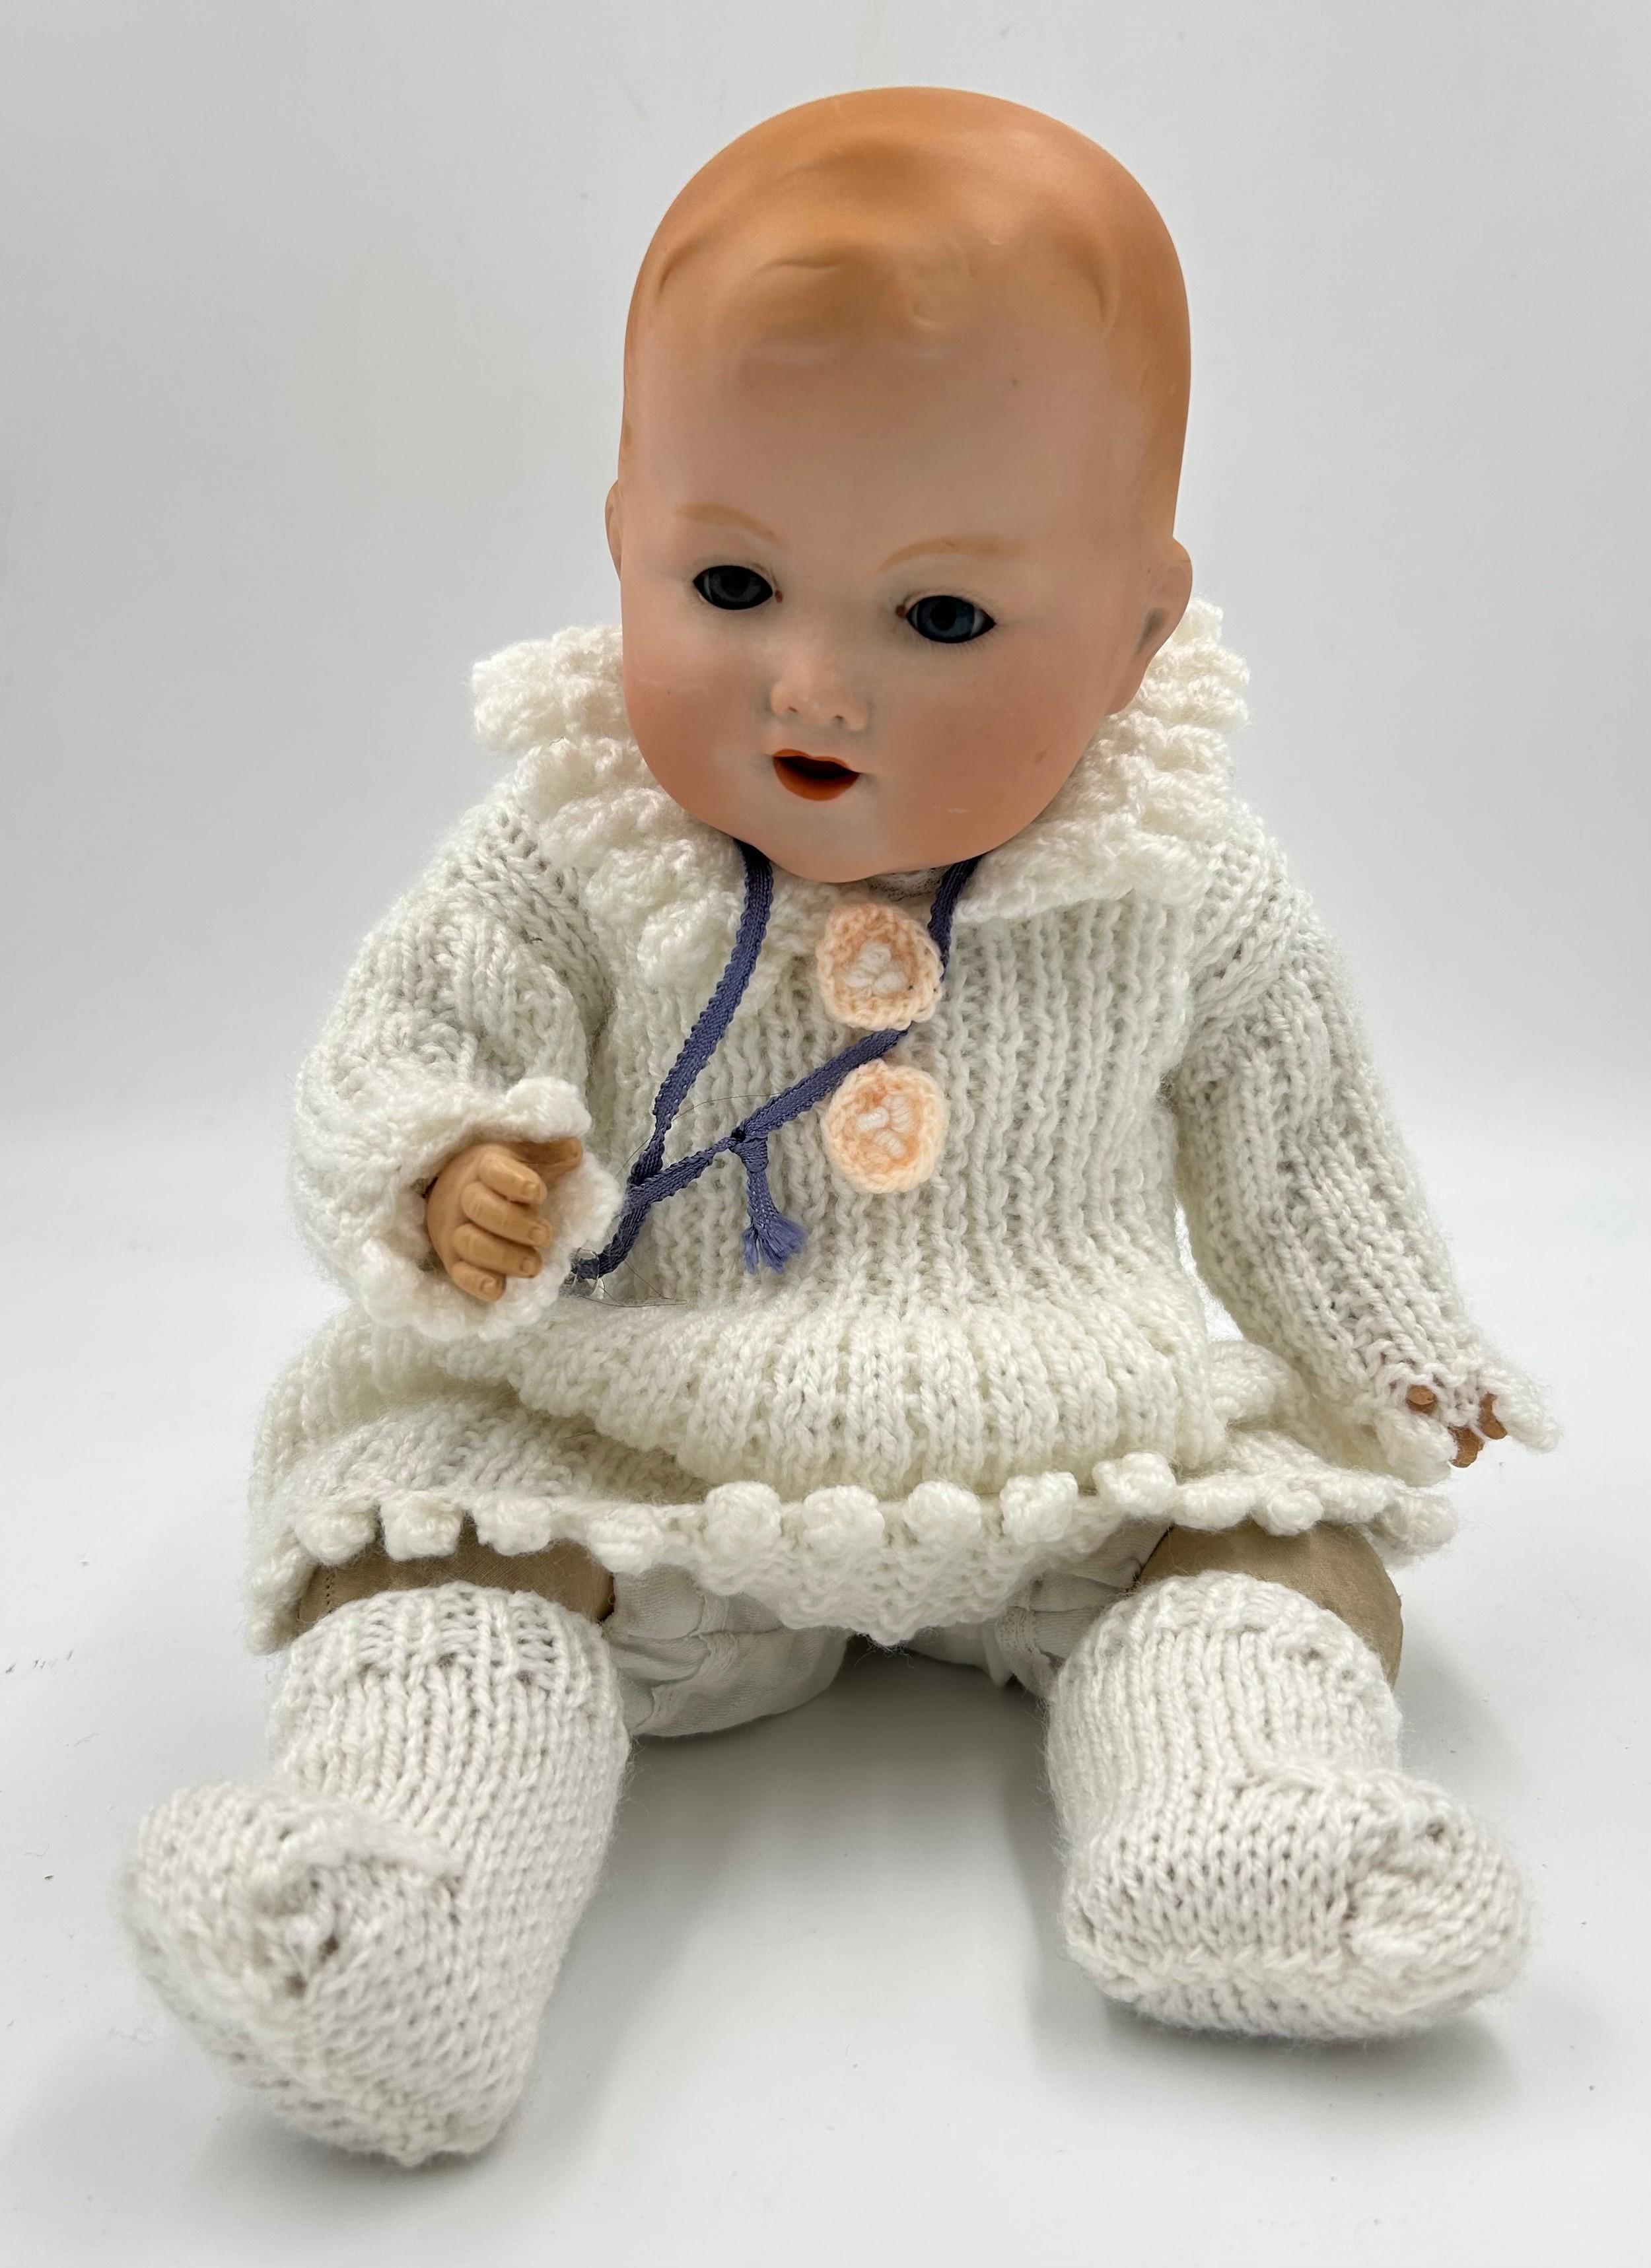 A German Armand Marseille Bisque headed Baby Doll (353/4) with knitted outer clothing and original